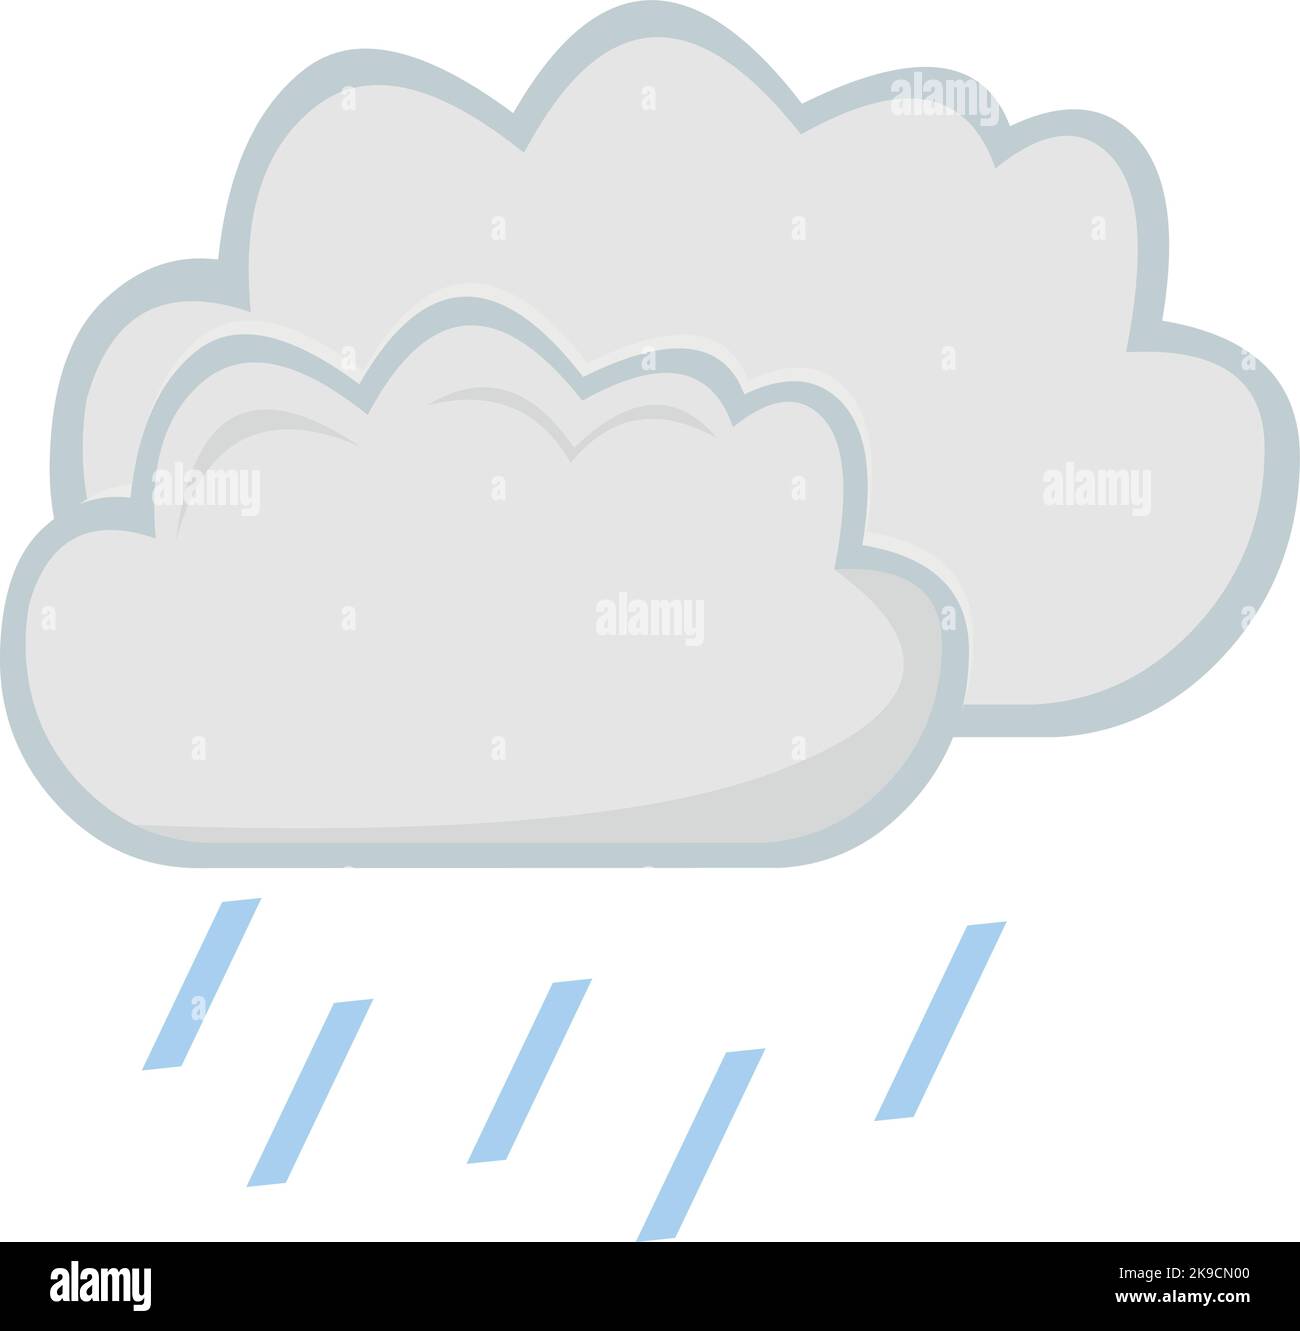 Vector illustration of cloud icon with raindrops Stock Vector